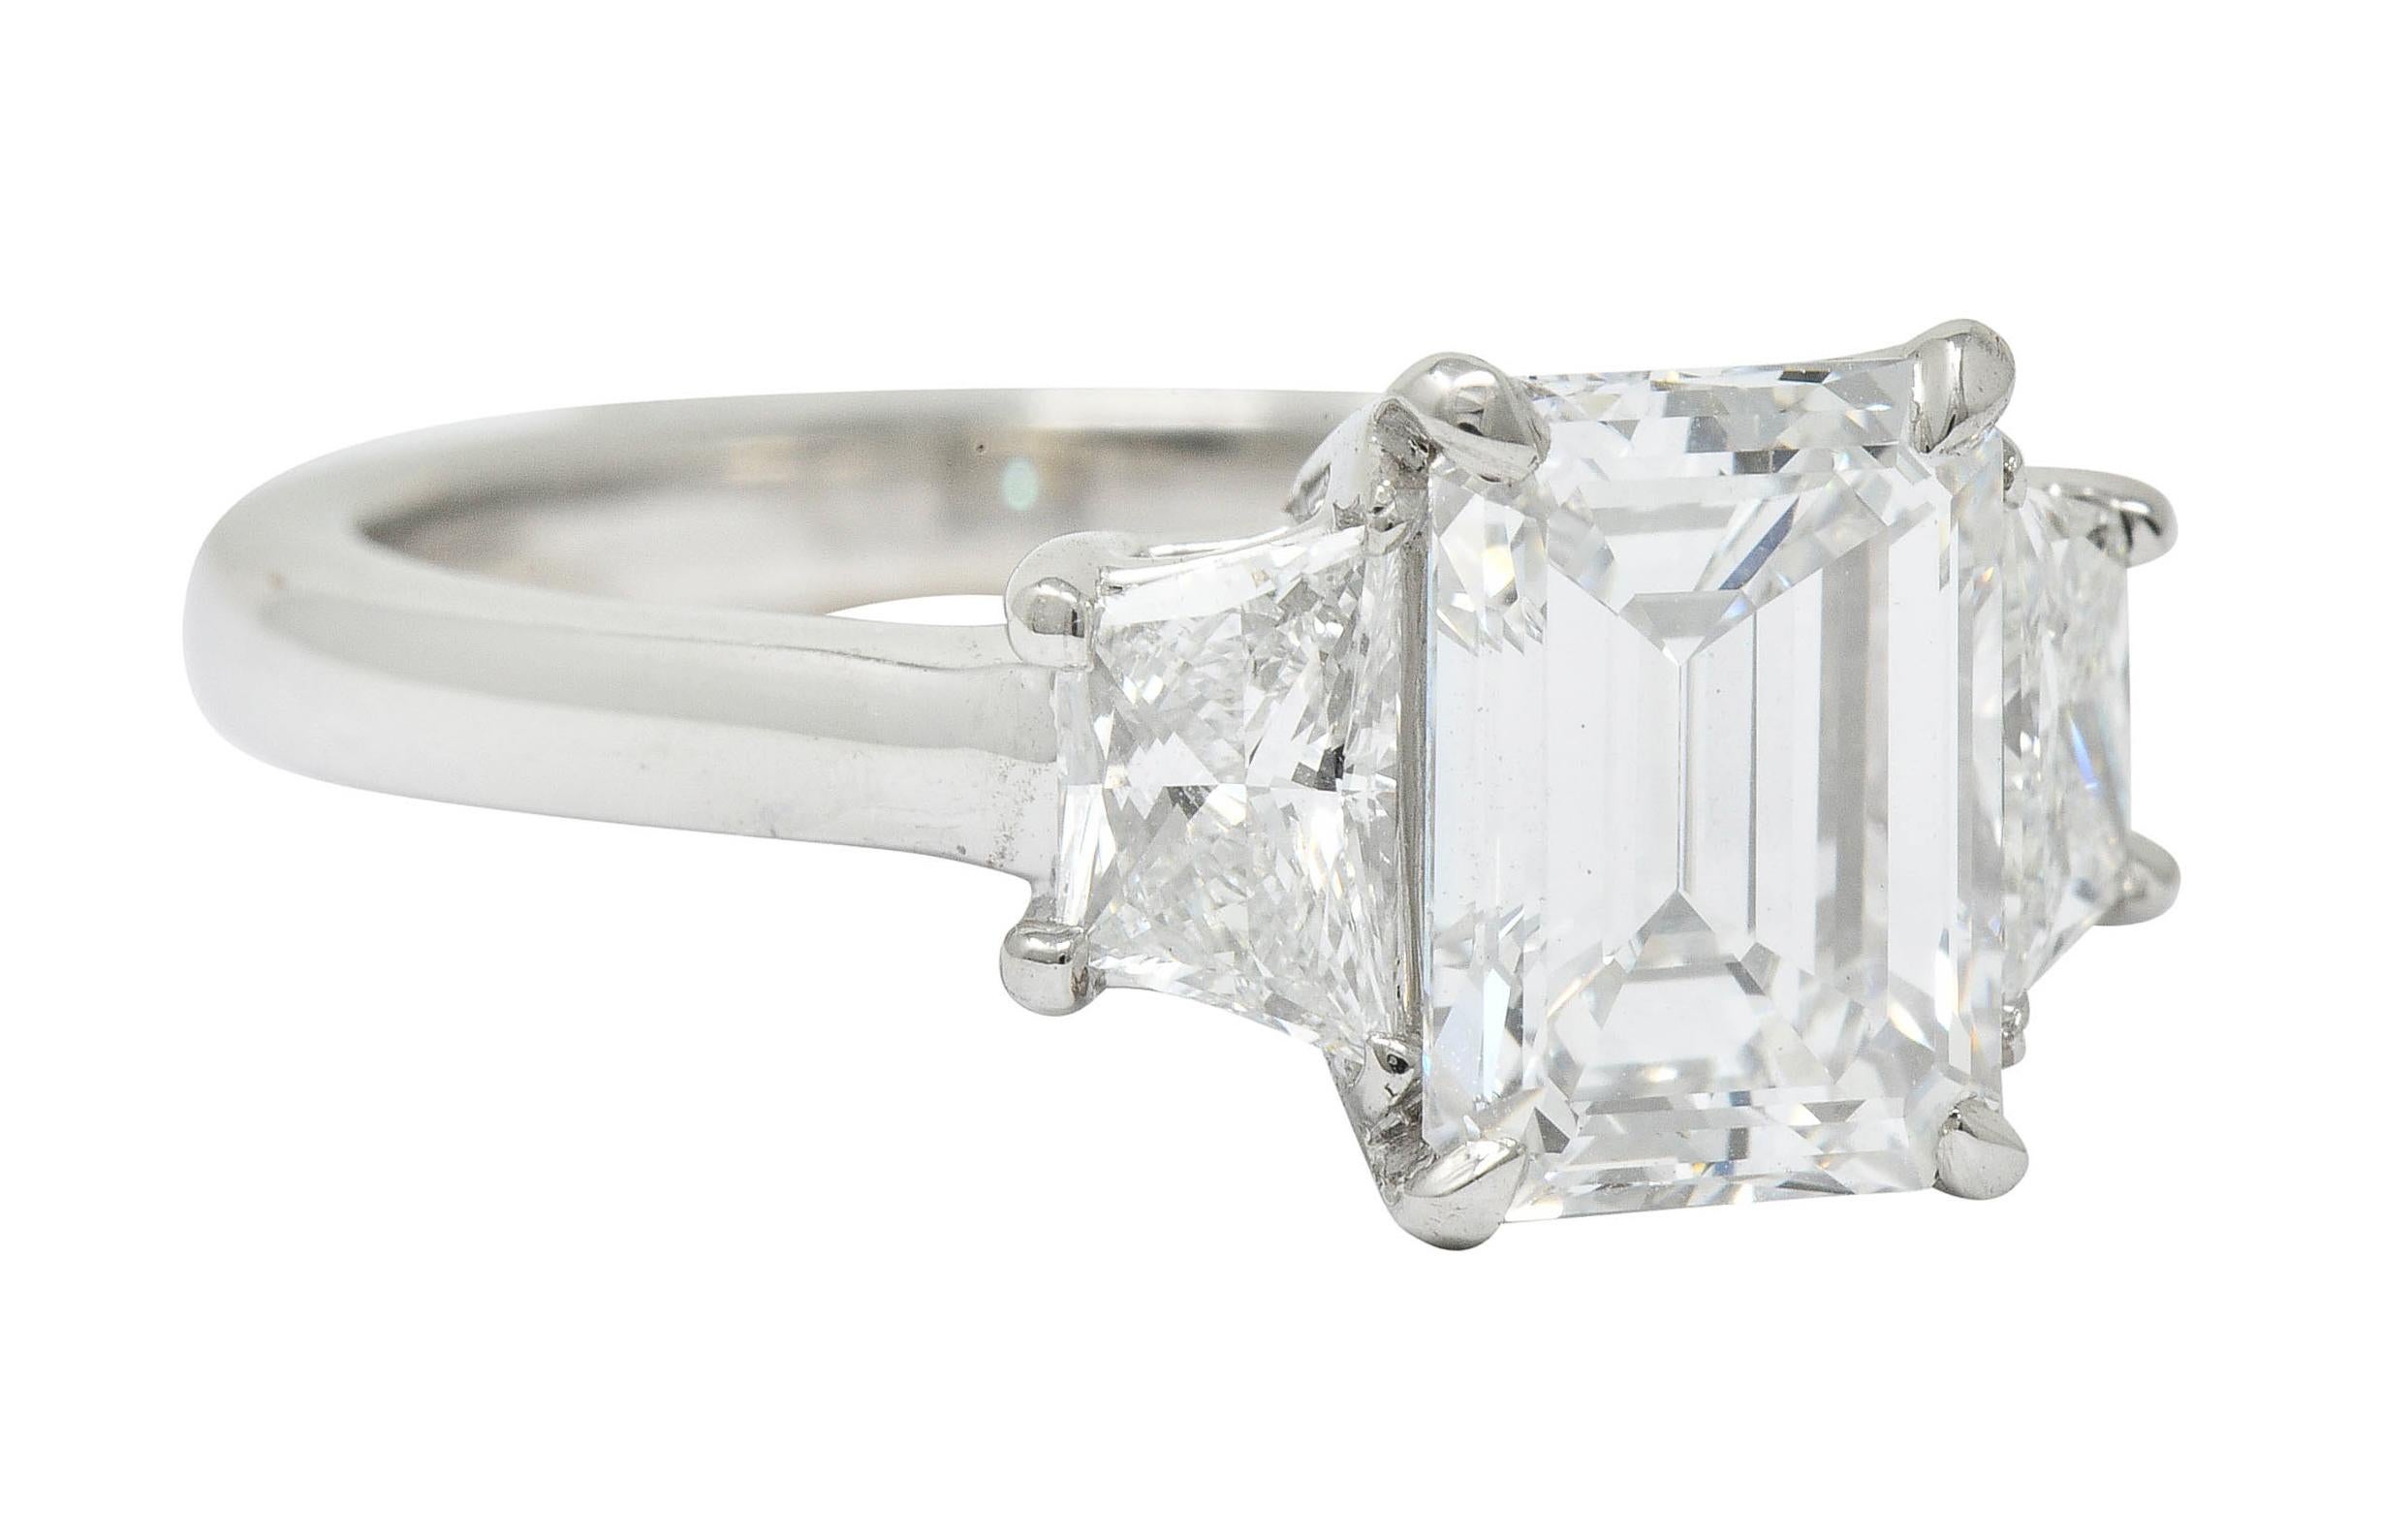 Centering a basket set emerald cut diamond weighing 2.01 carat; E color with VVS2 clarity

Flanked by two trapezoid cut diamonds weighing approximately 0.80 carat; F/G color with VVS clarity

Stamped Plat for platinum

Ring Size: 5 3/4 &